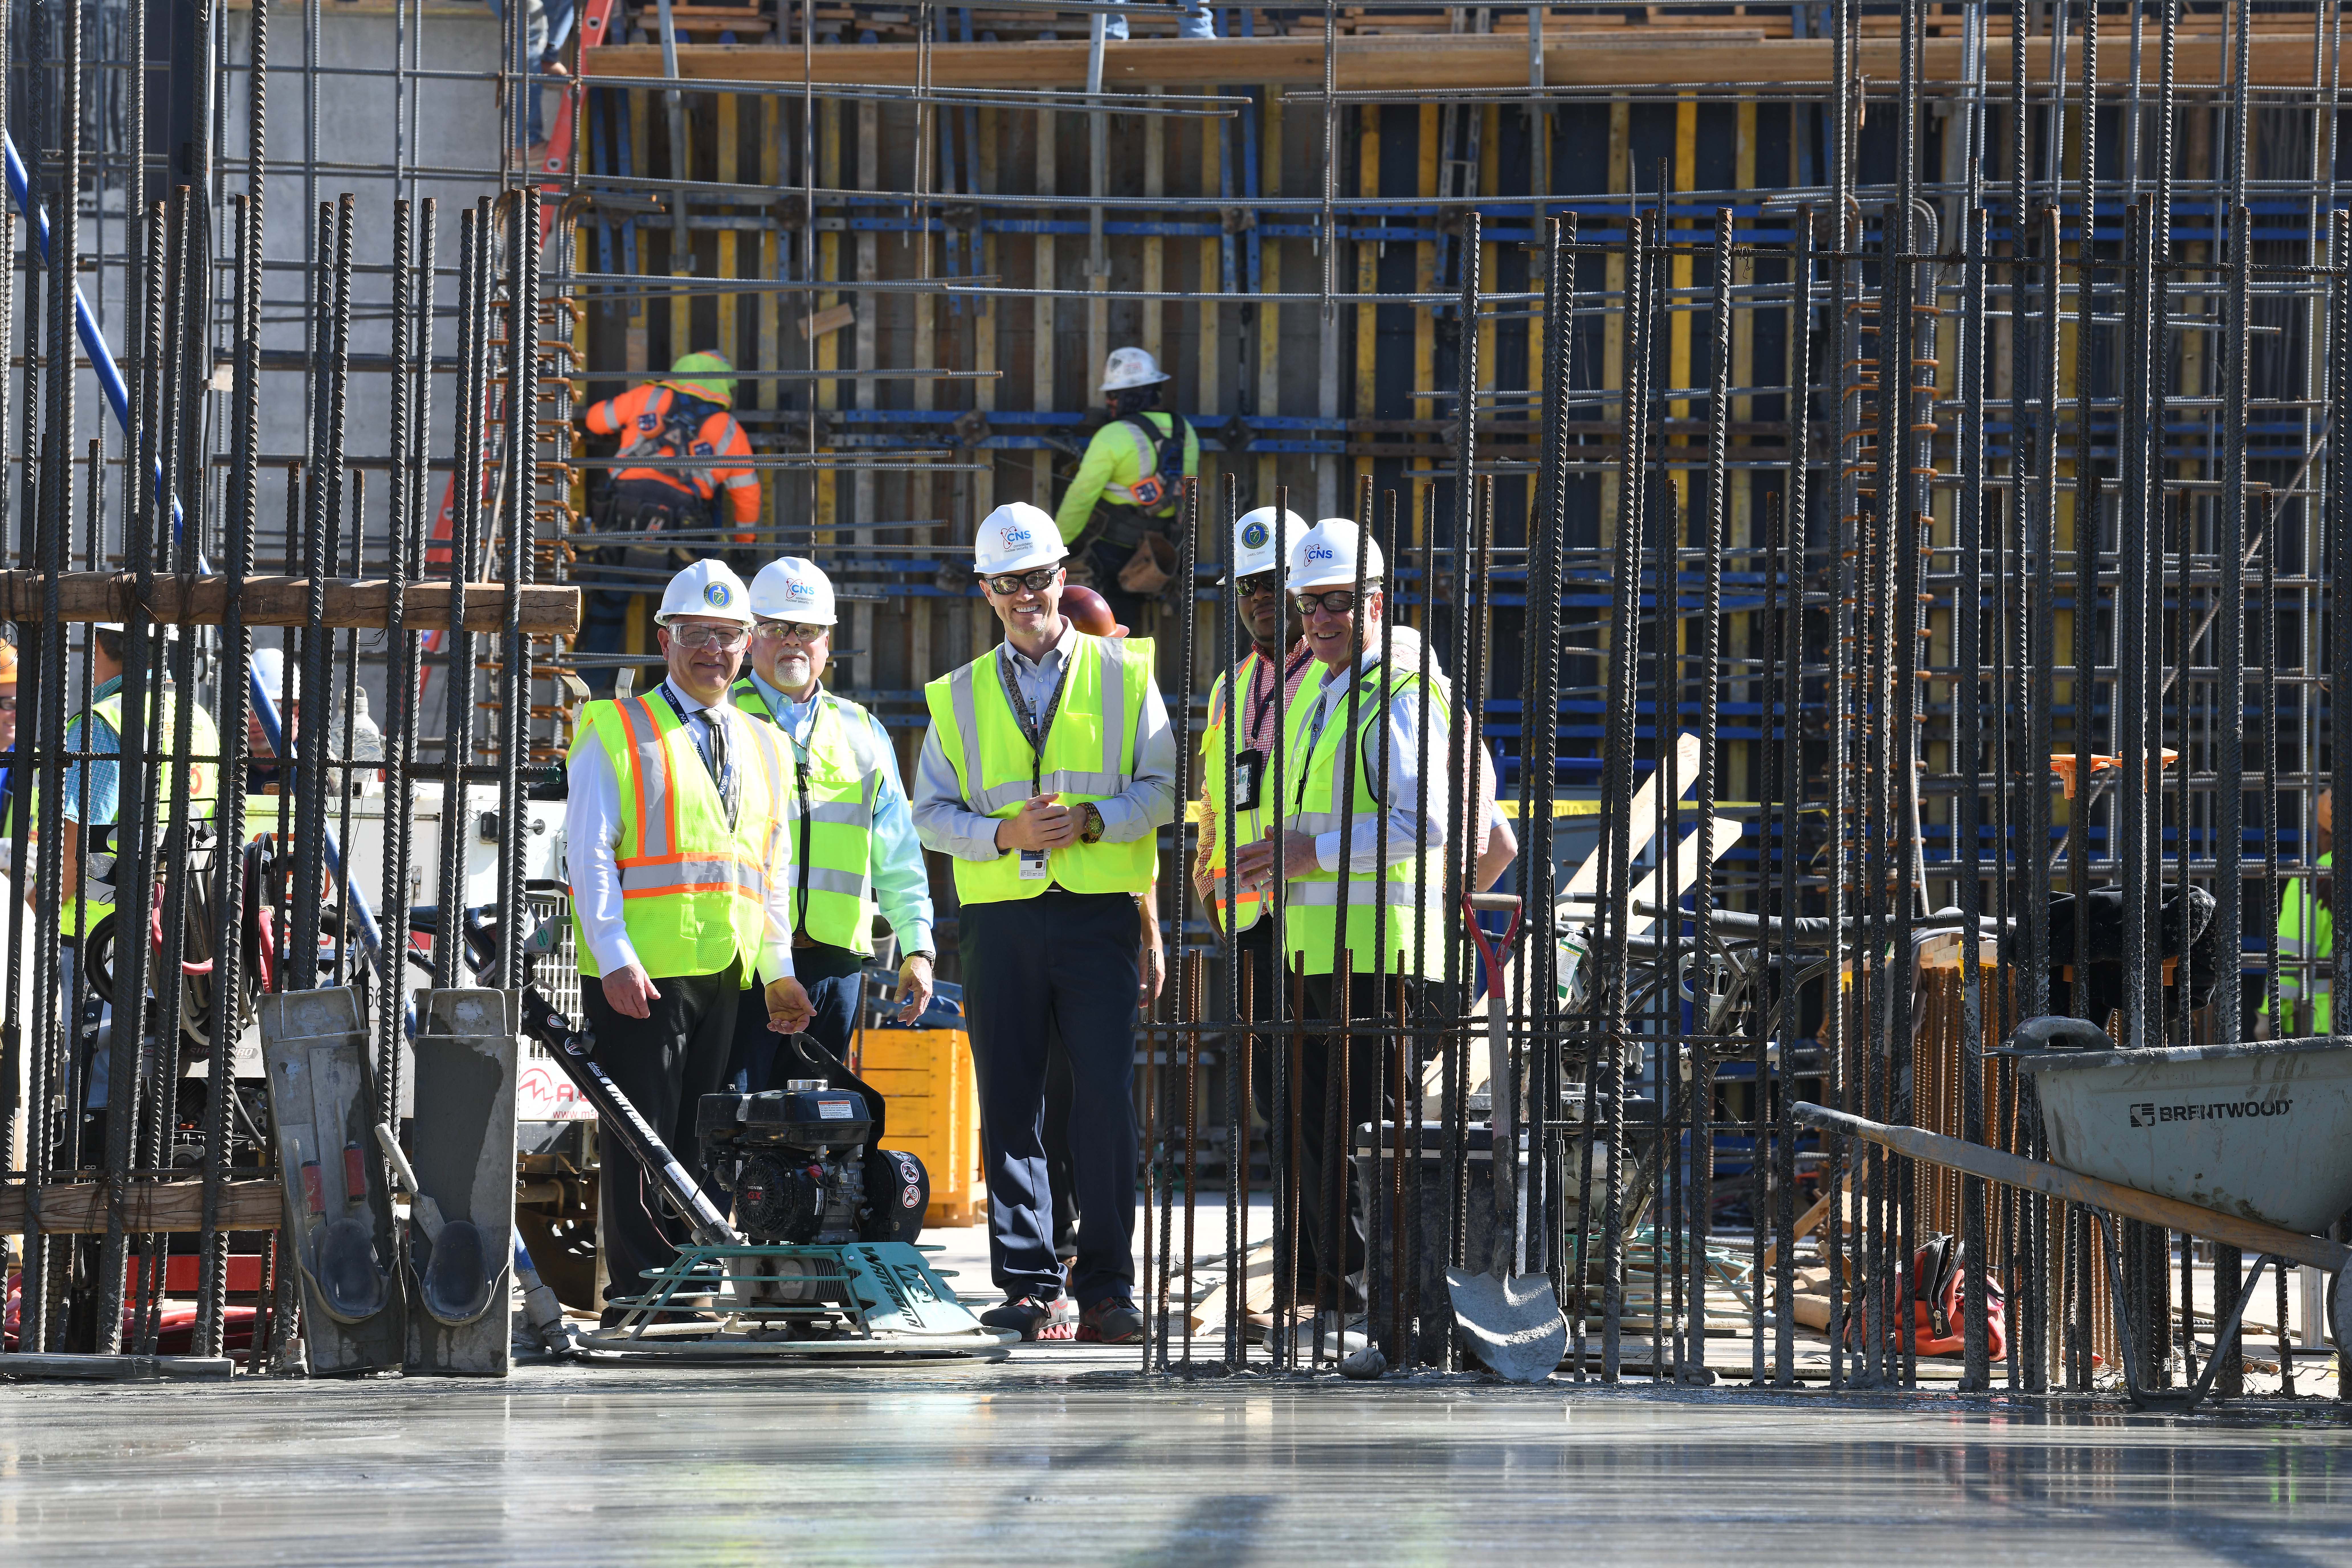 CNS and NPO leadership look on as the final 250 cubic yards of concrete are placed to complete the High Explosive lab foundation.